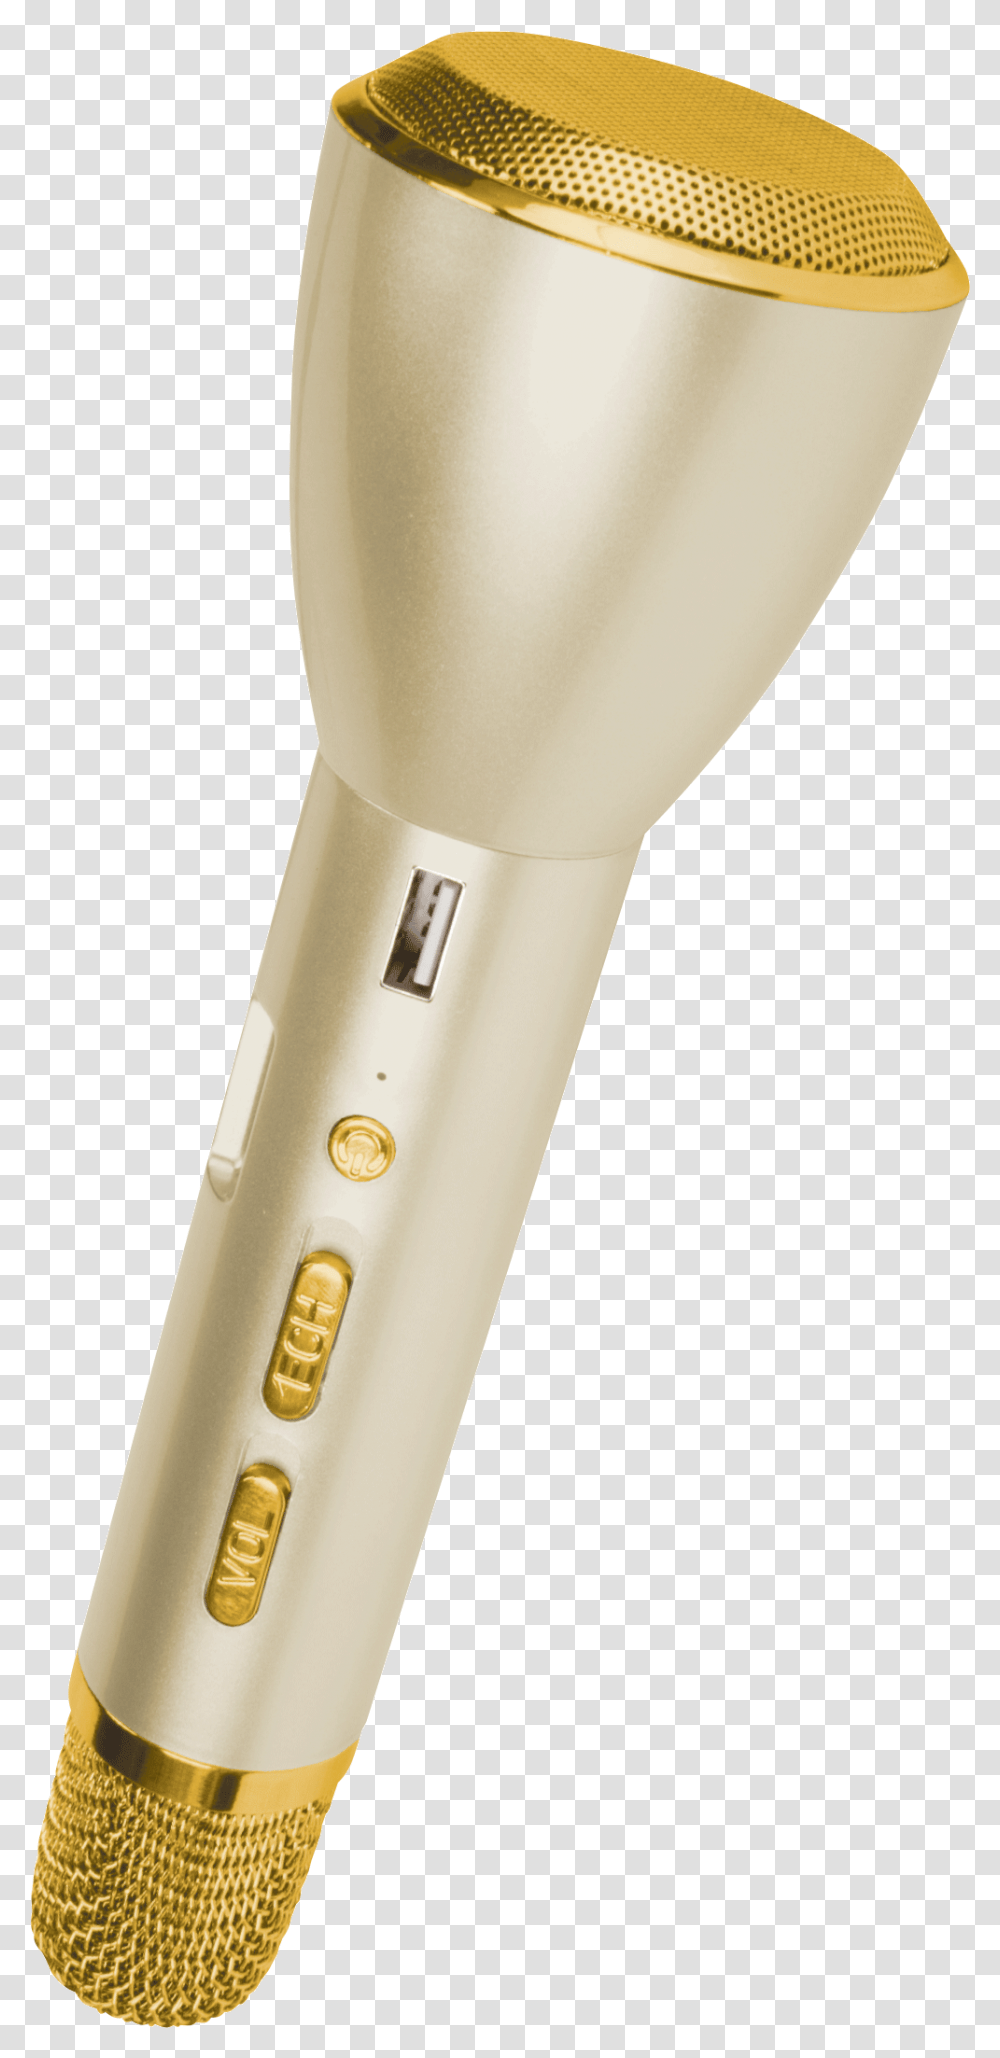 Brush, Microphone, Electrical Device, Lamp Transparent Png